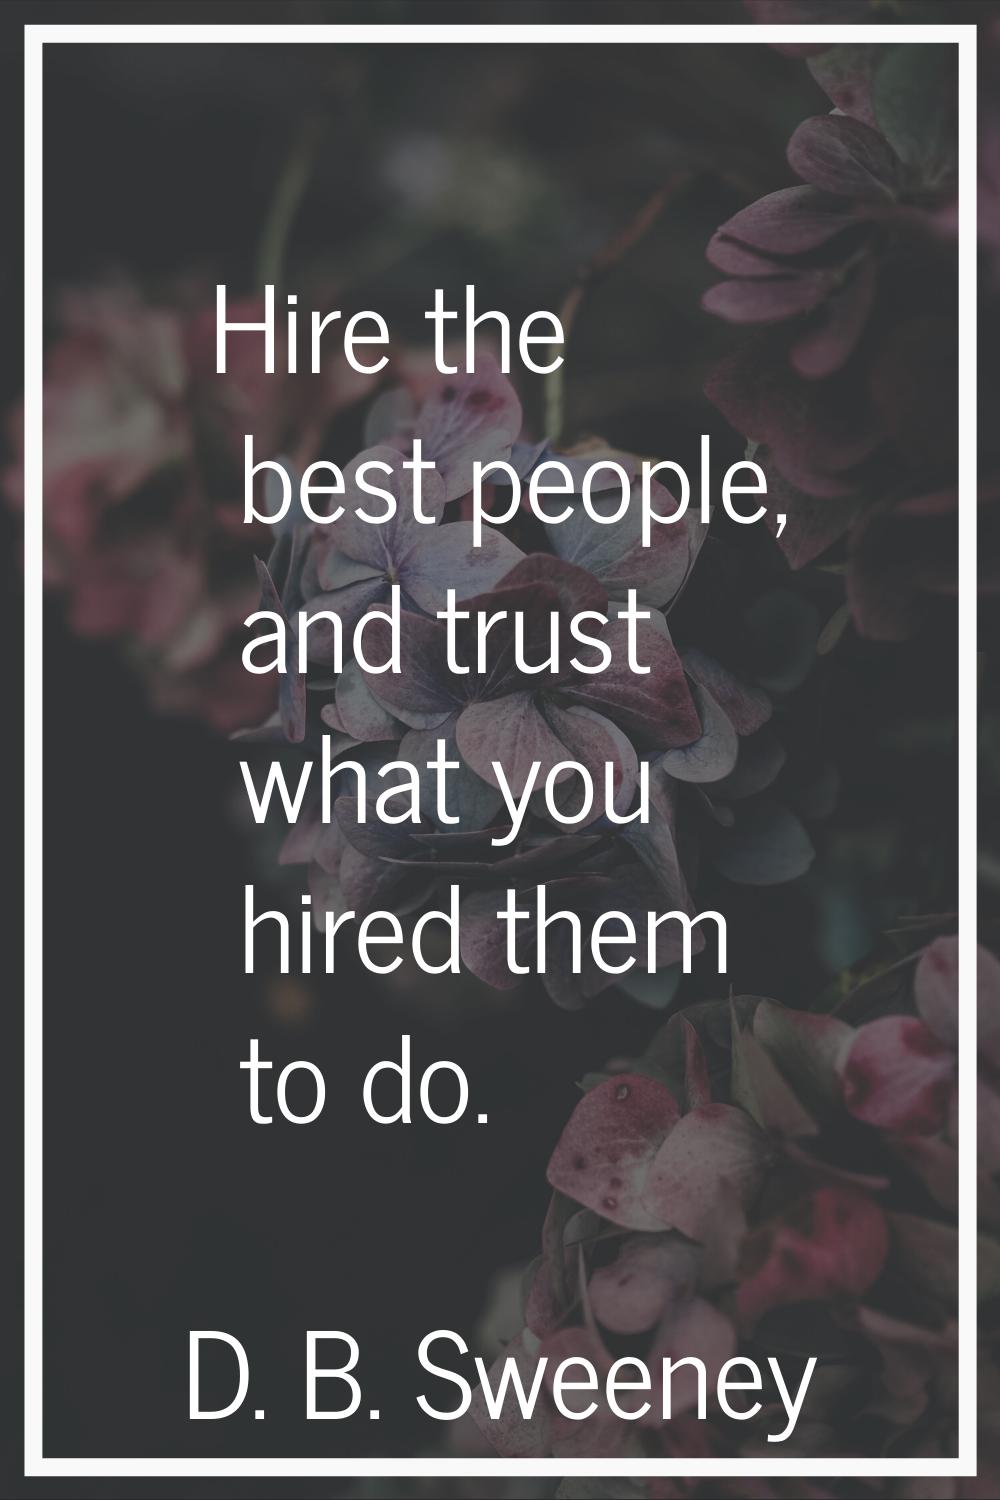 Hire the best people, and trust what you hired them to do.